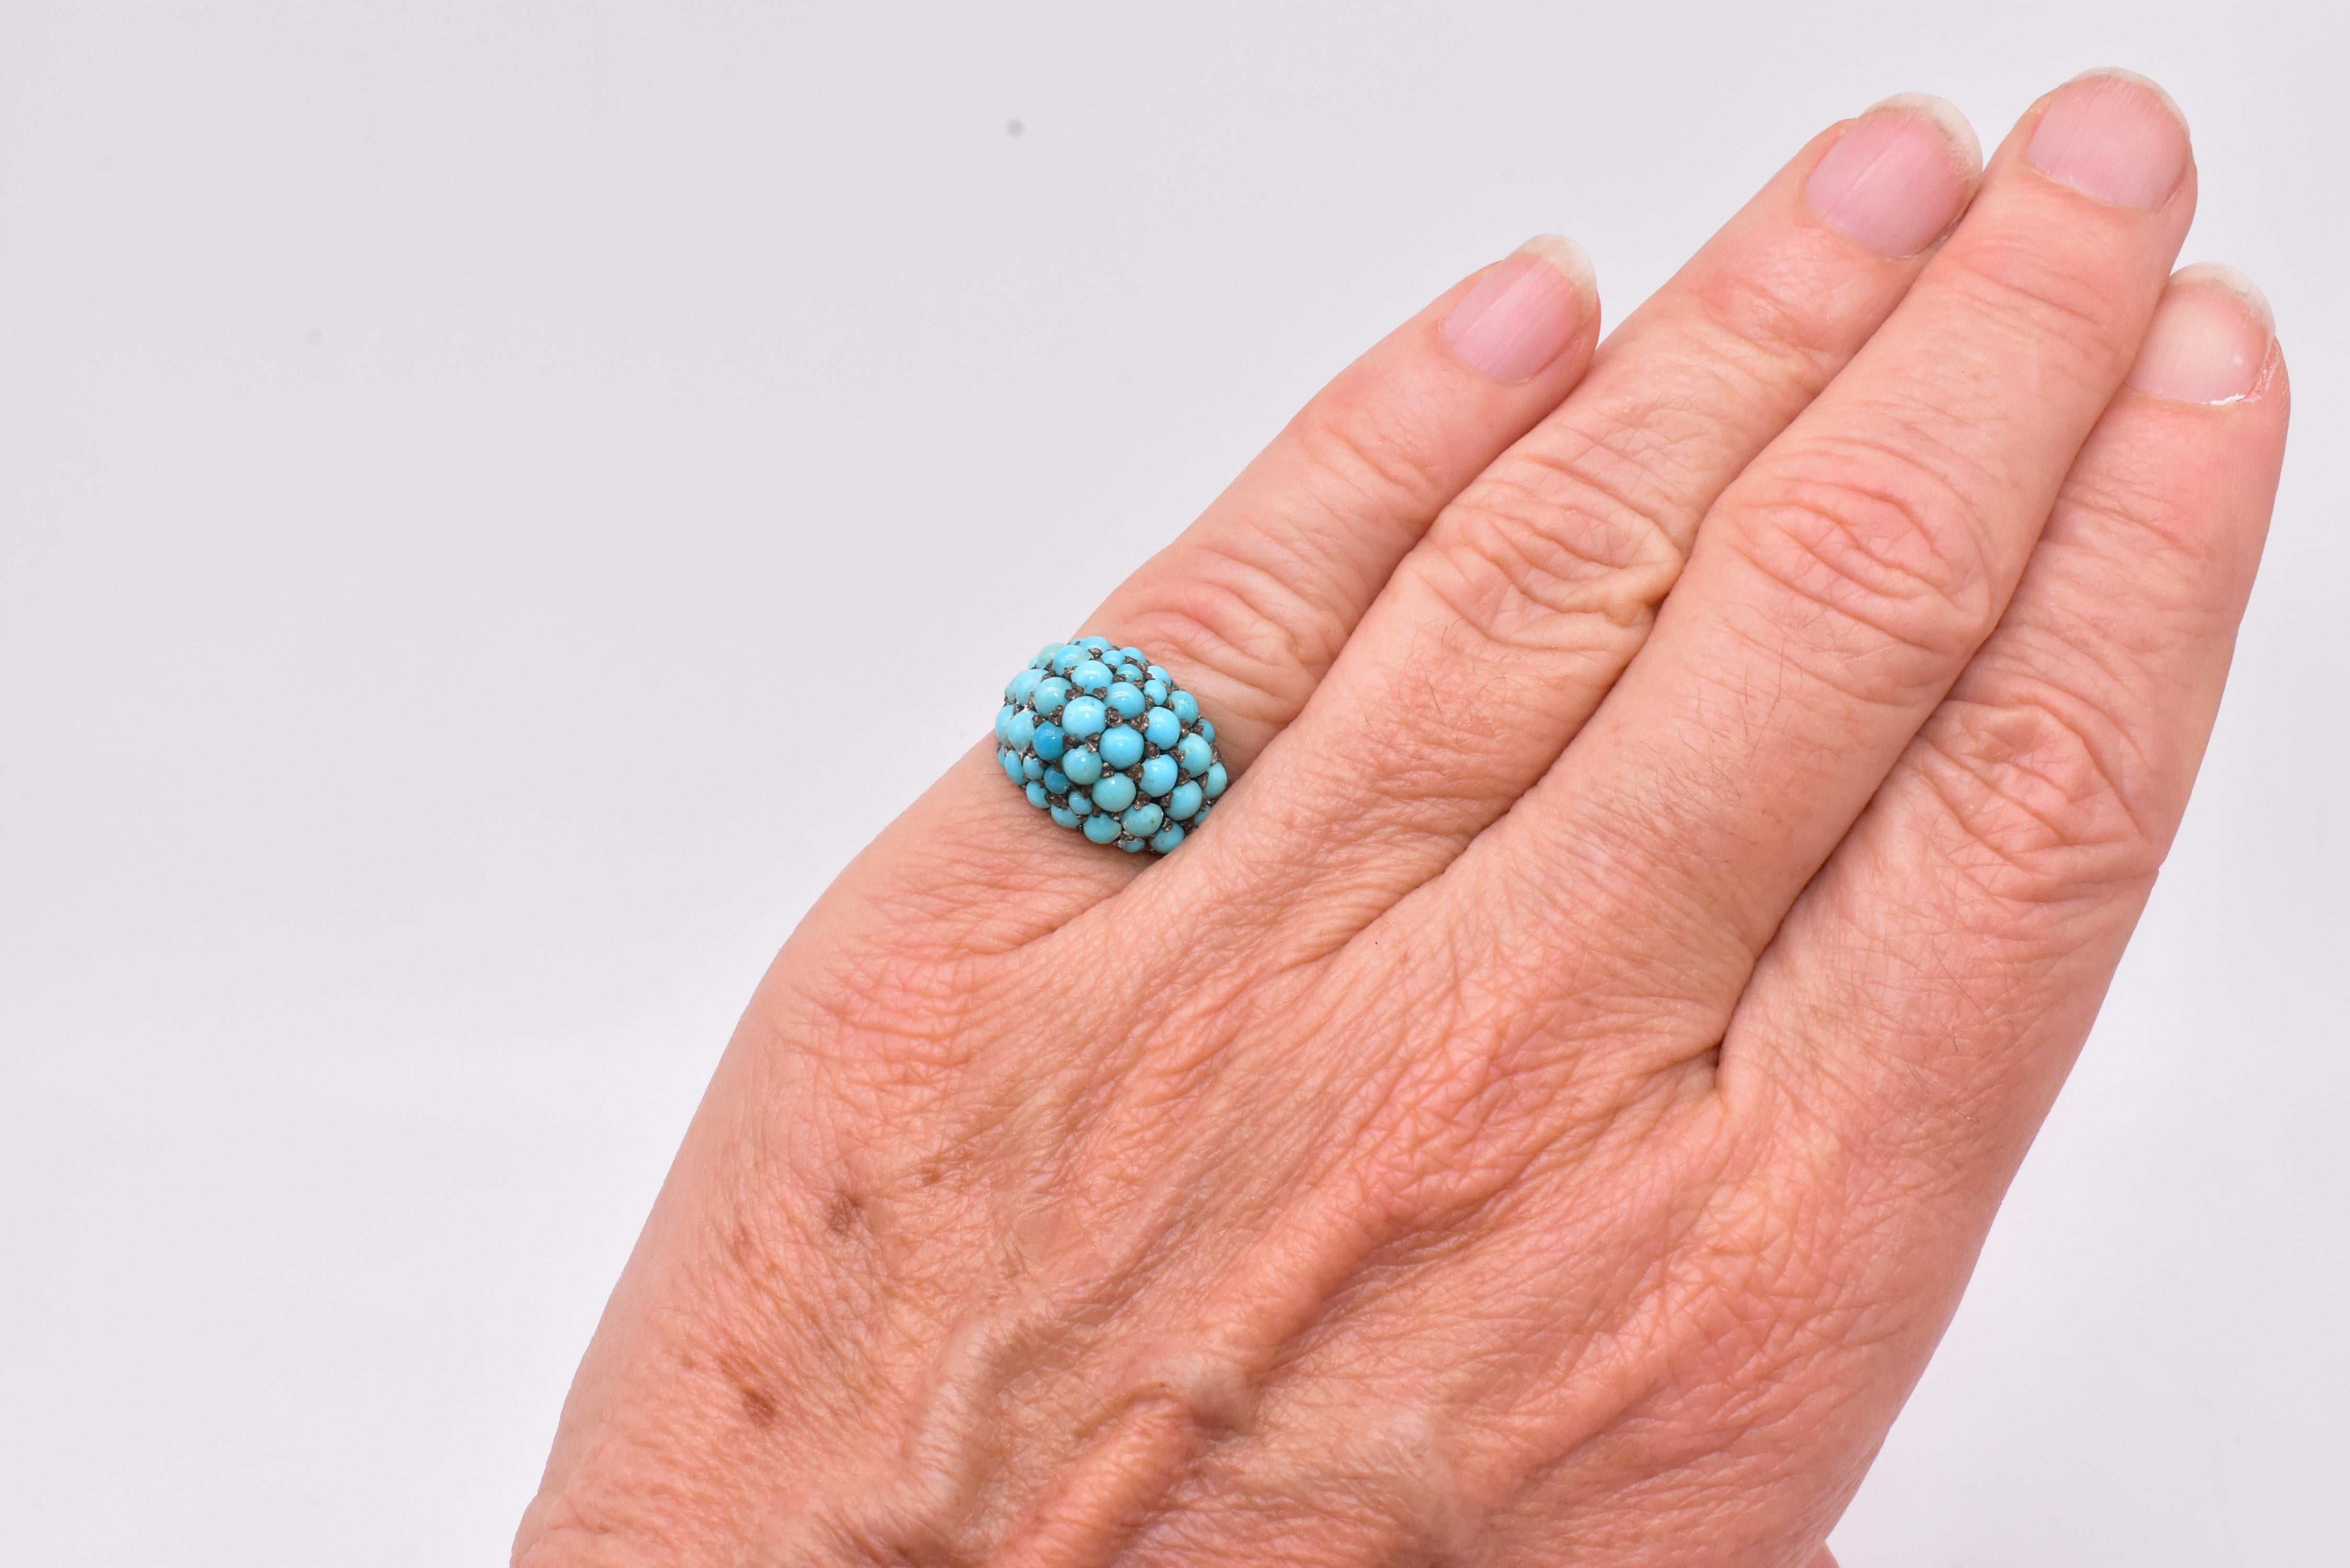 A fine Victorian bombé ring pavé set with turquoise cabochons, with a band of 15k gold and stones set in silver. The turquoise stones are a lovely blue color symbolizing innocence and virtue while the turquoise symbolizes happiness. The ring is